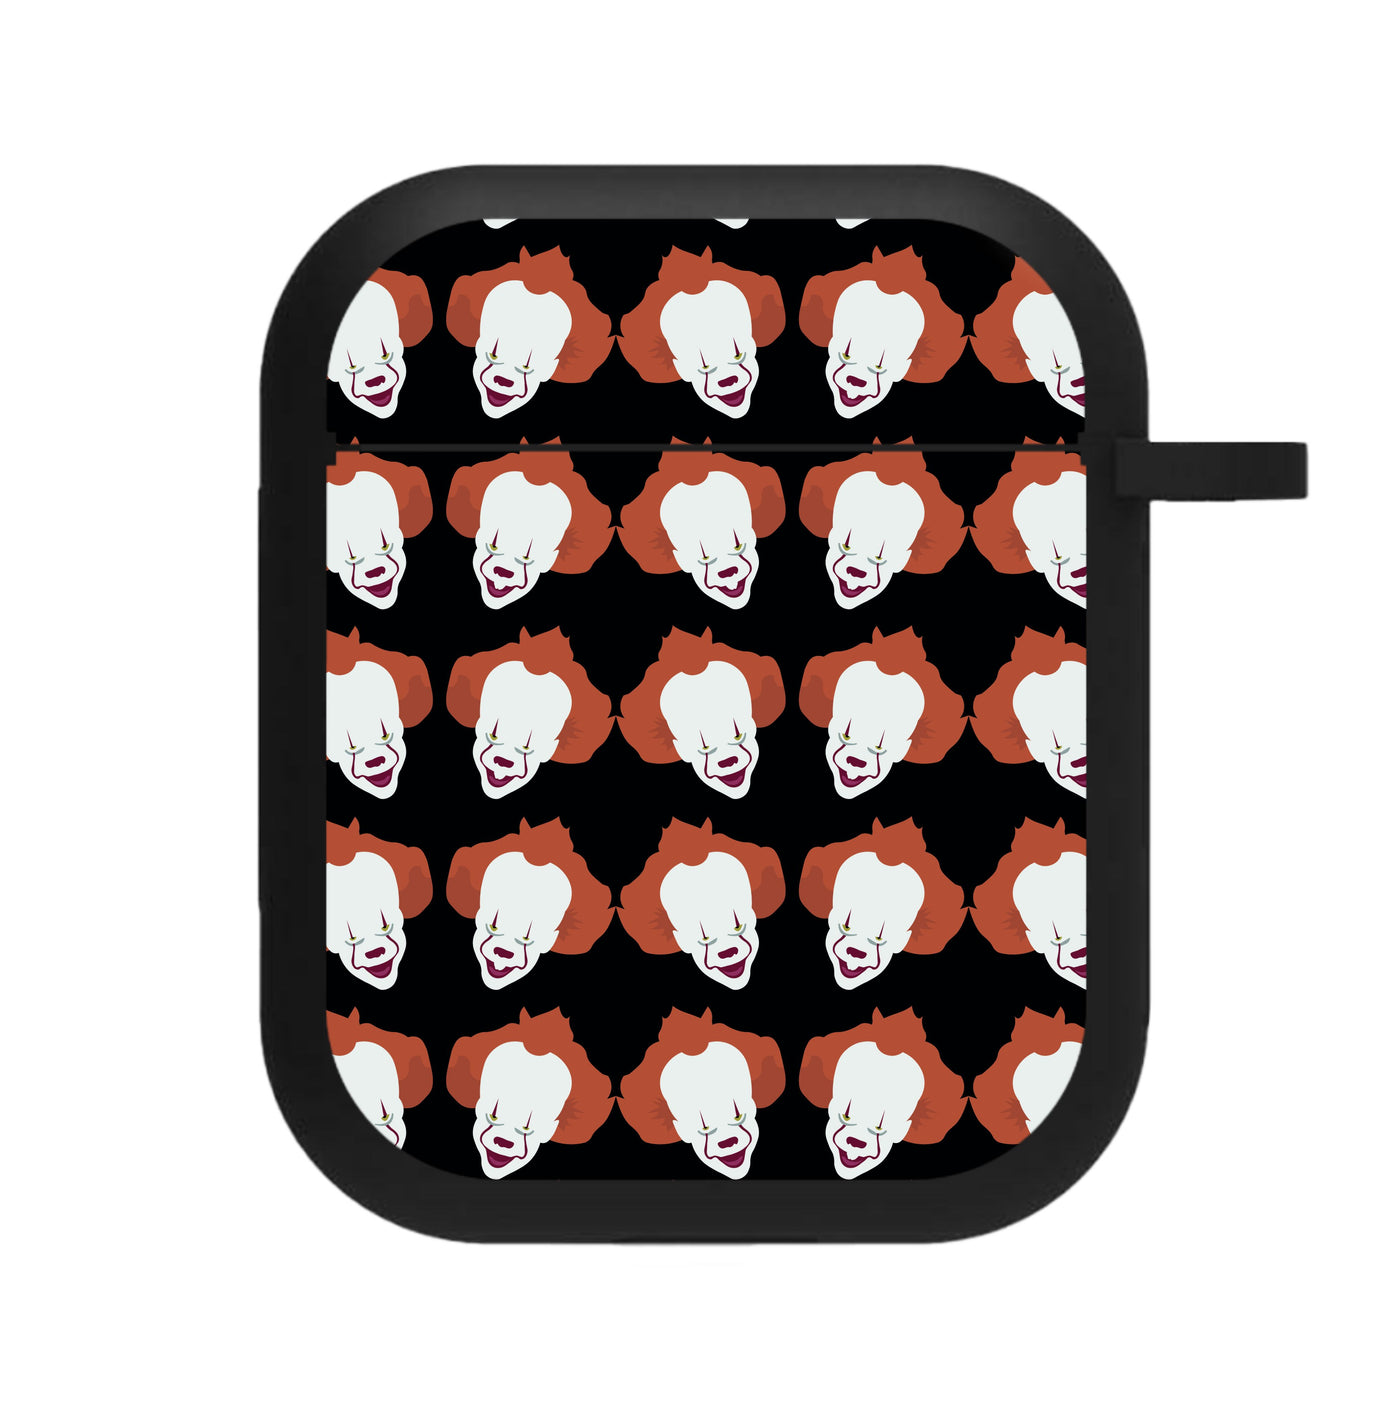 IT The Clown Pattern AirPods Case